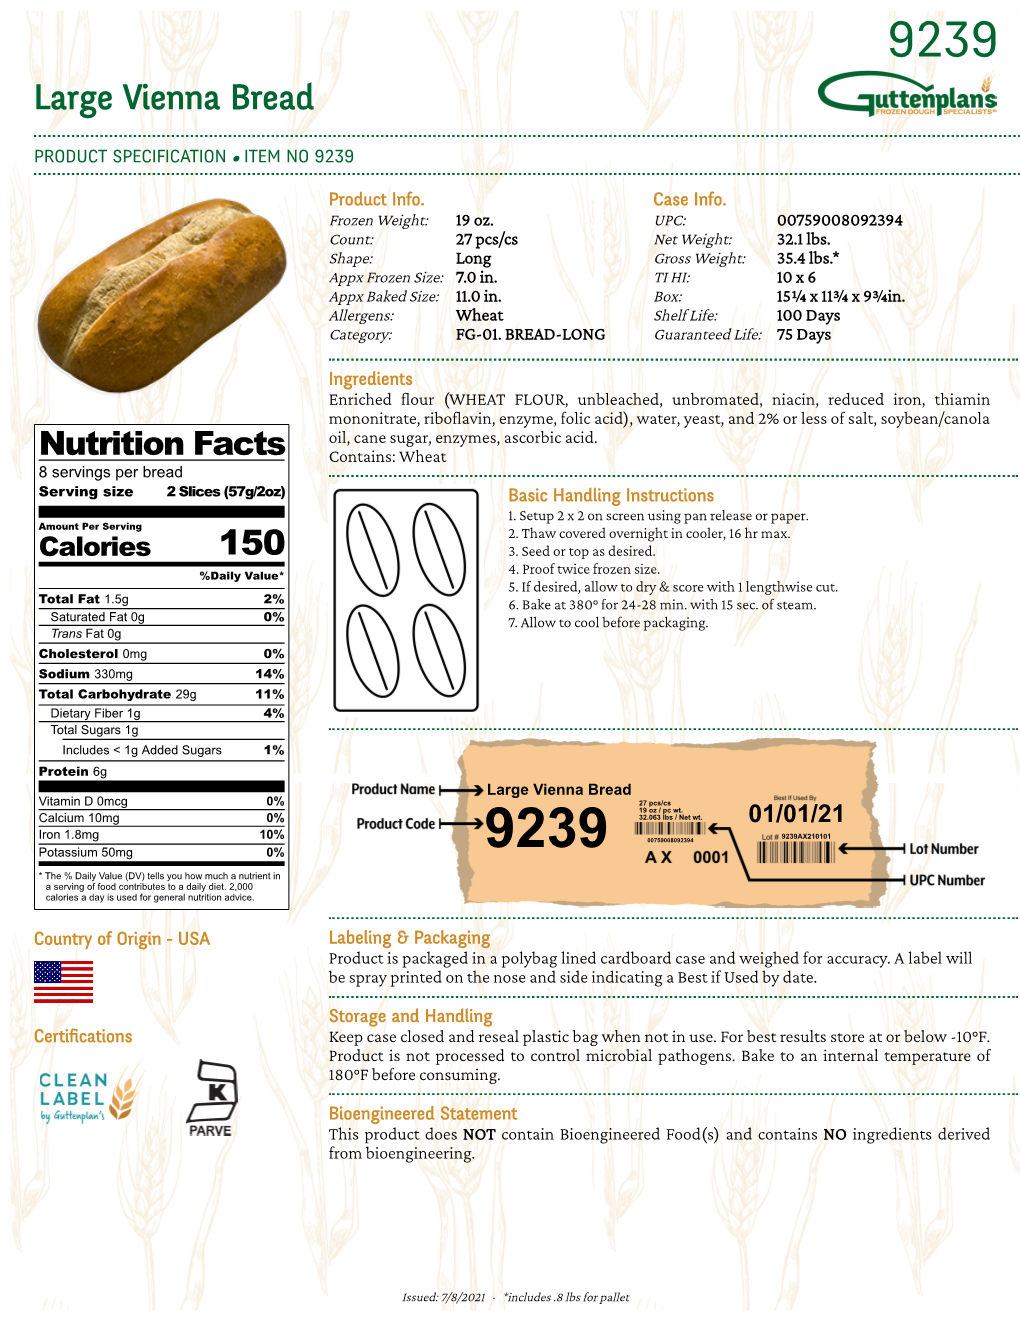 Large Vienna Bread Nutrition Facts